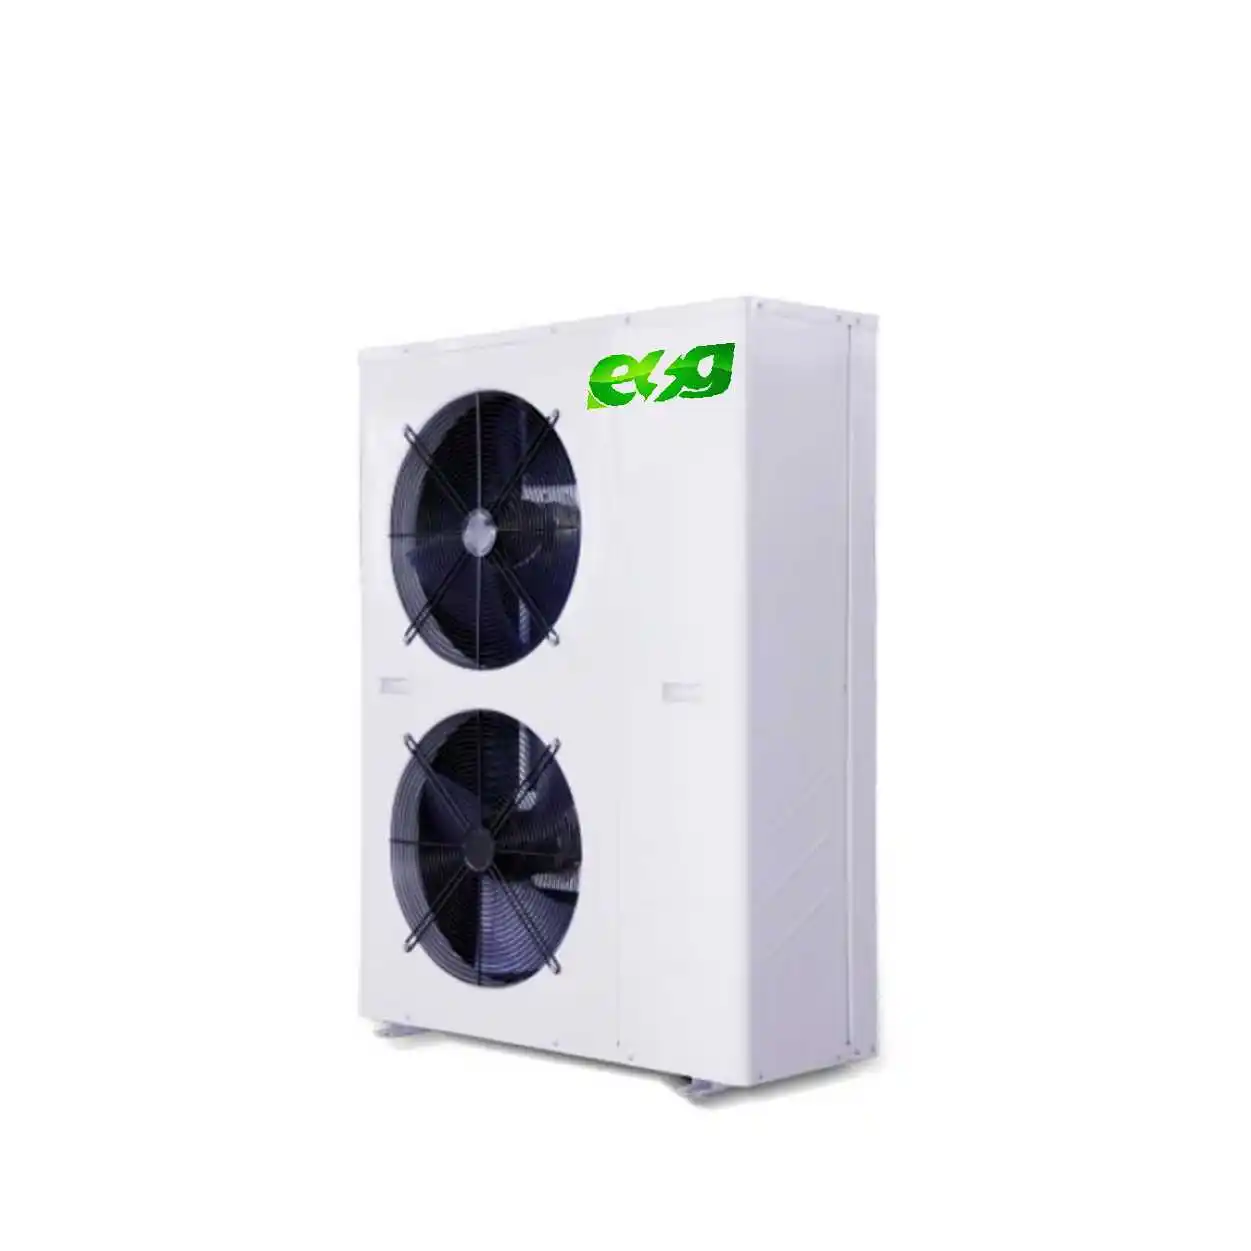 Esg Hot Selling Factory Price Wholesale Multi Function Heat And Cooling Air Source Heat Pump 15kw